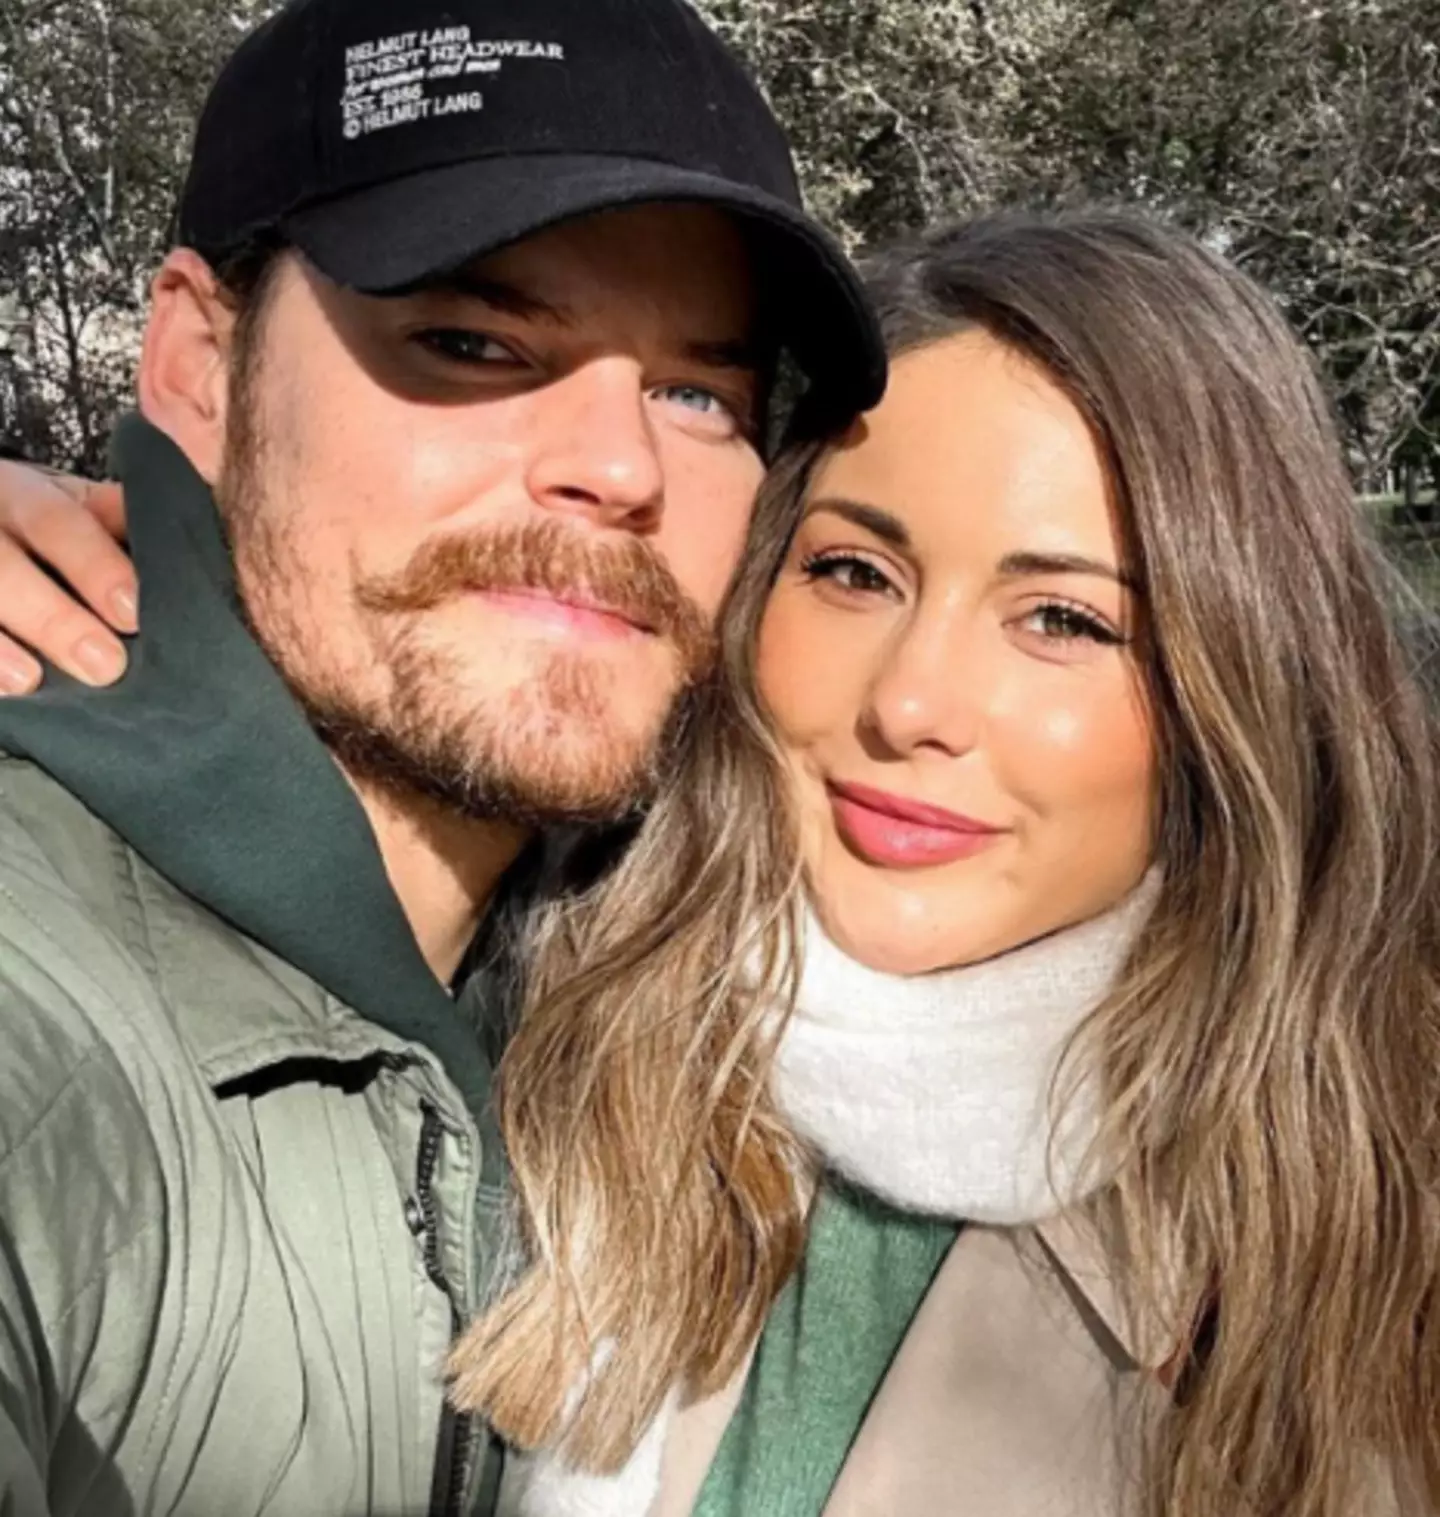 Louise Thompson's fiancé, Ryan Libbey, revealed his wife was rushed to hospital for the second time this month.